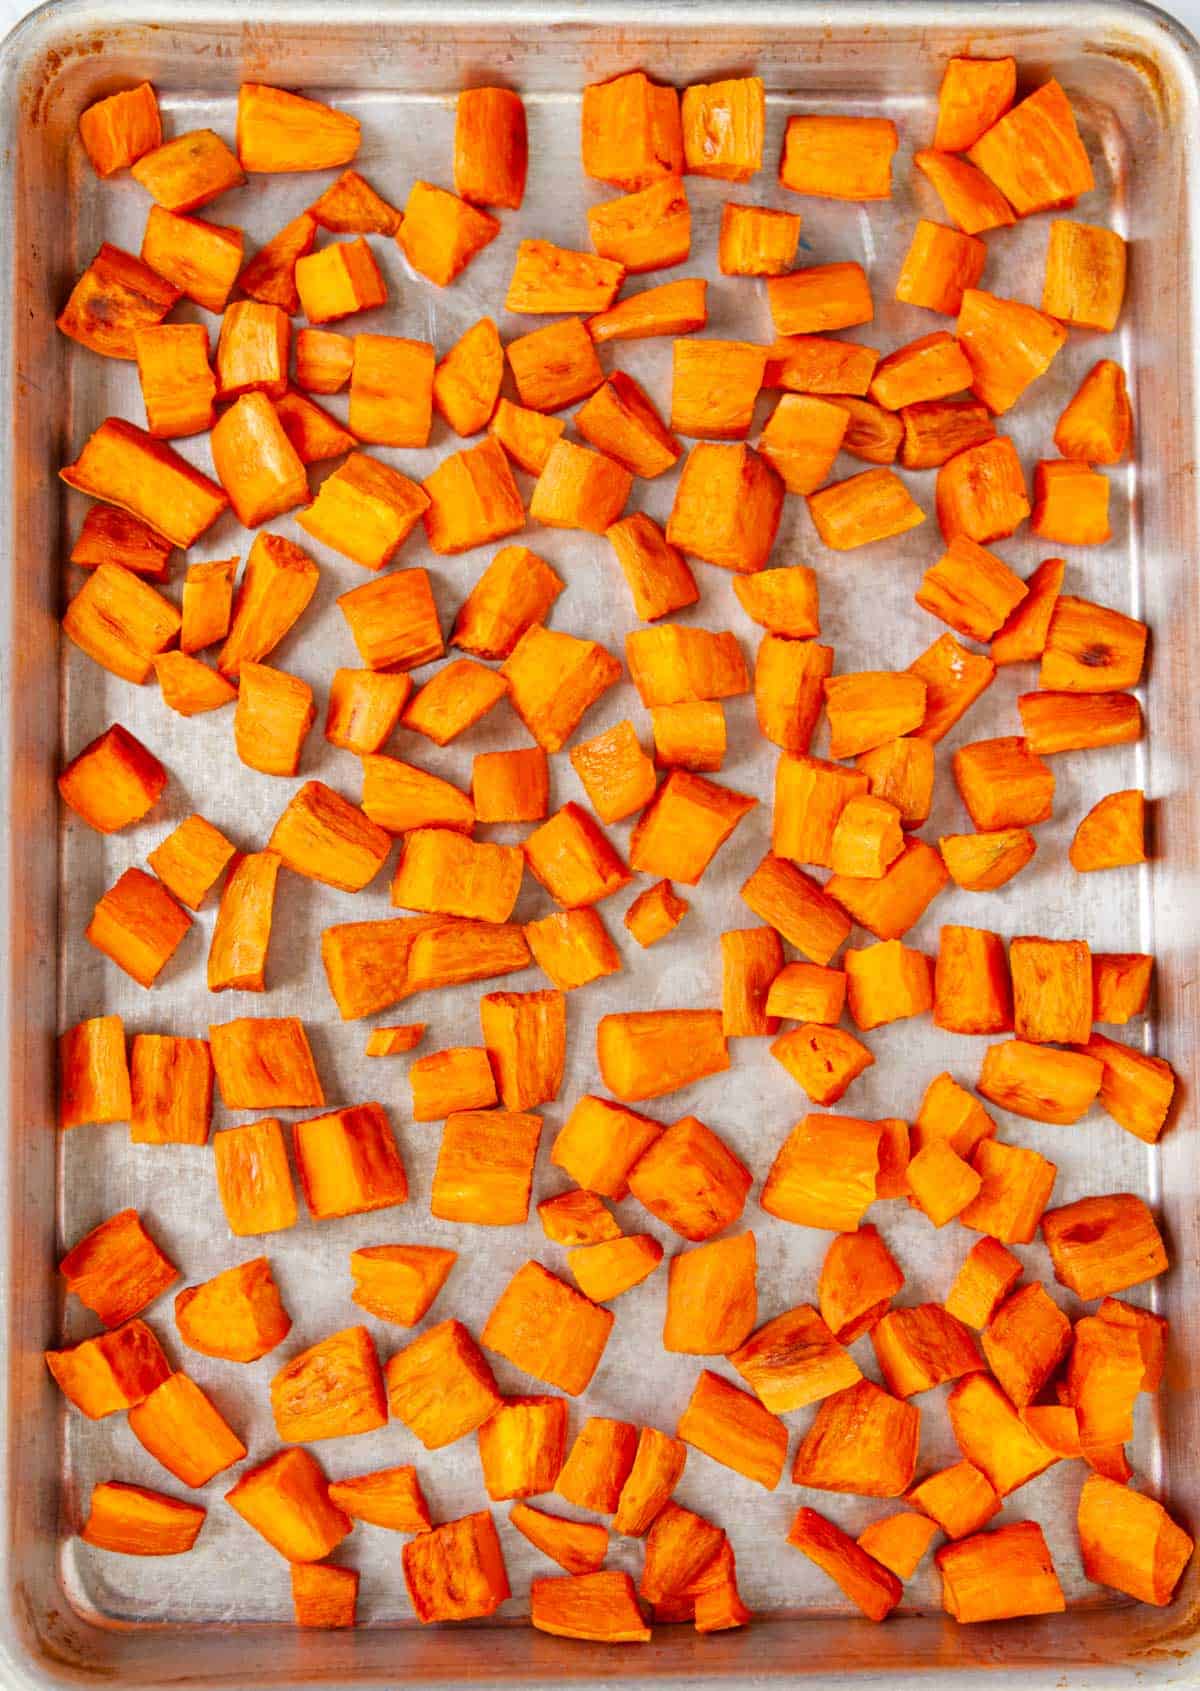 cubed, roasted sweet potatoes on a sheet pan